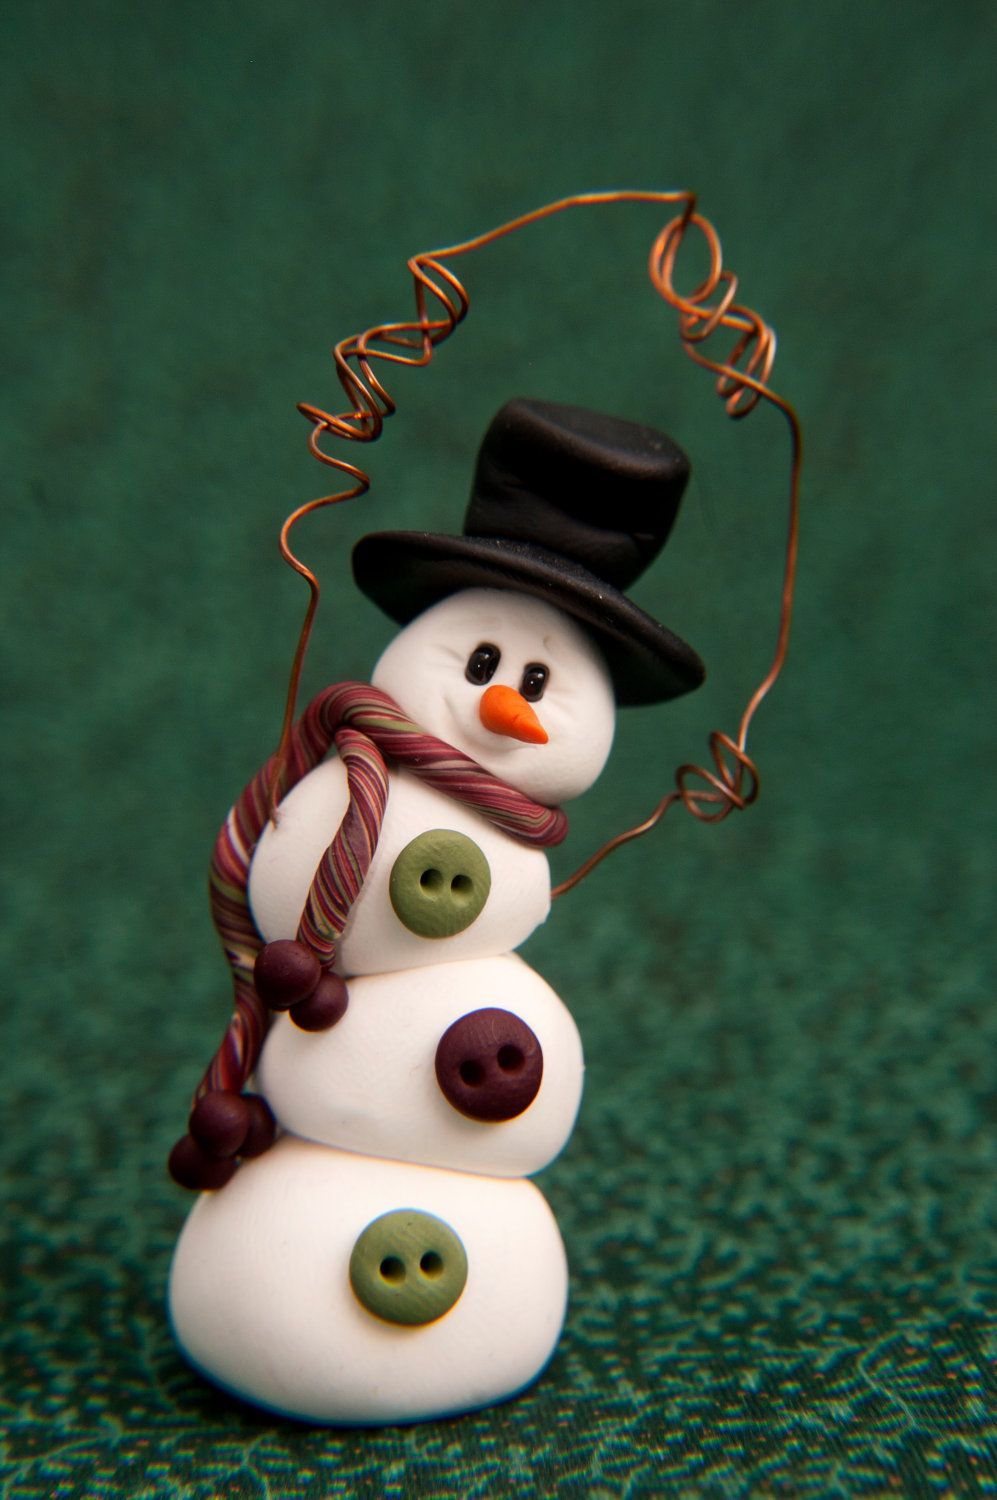 Topsy-Turvy Clay Snowman Ornament. Cute idea to make ornaments for the girls christmas tree, change the colors to make it more